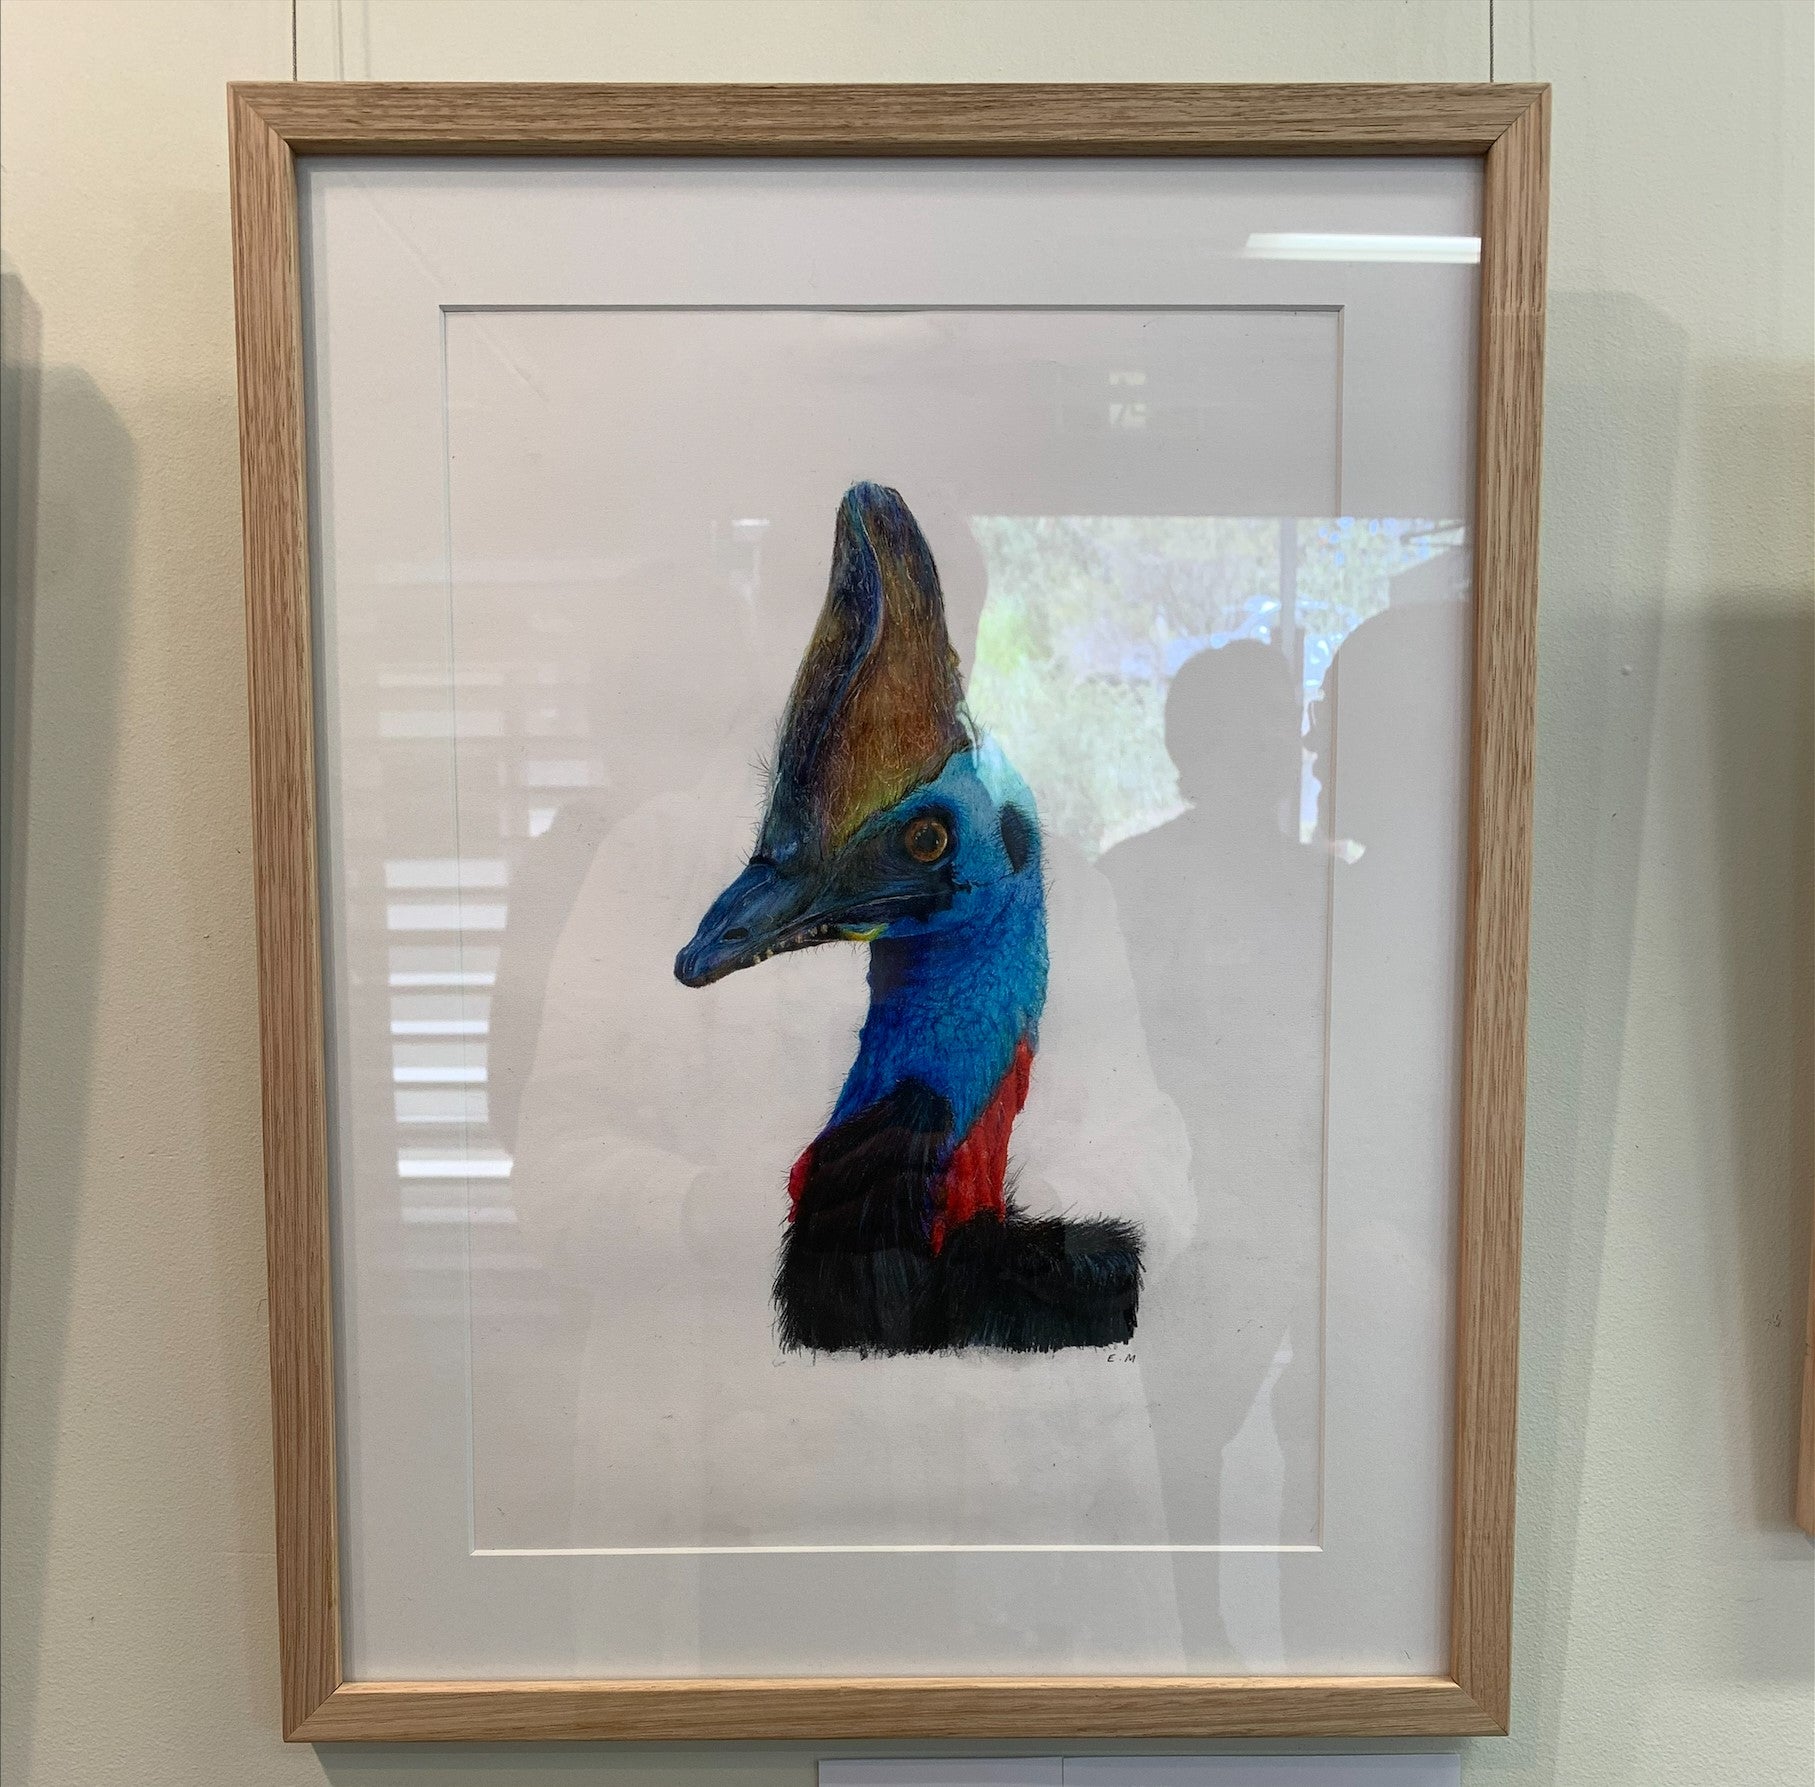 Under 18s Threatened Species winner “The Bold and Beautiful Southern Cassowary” by Erin M